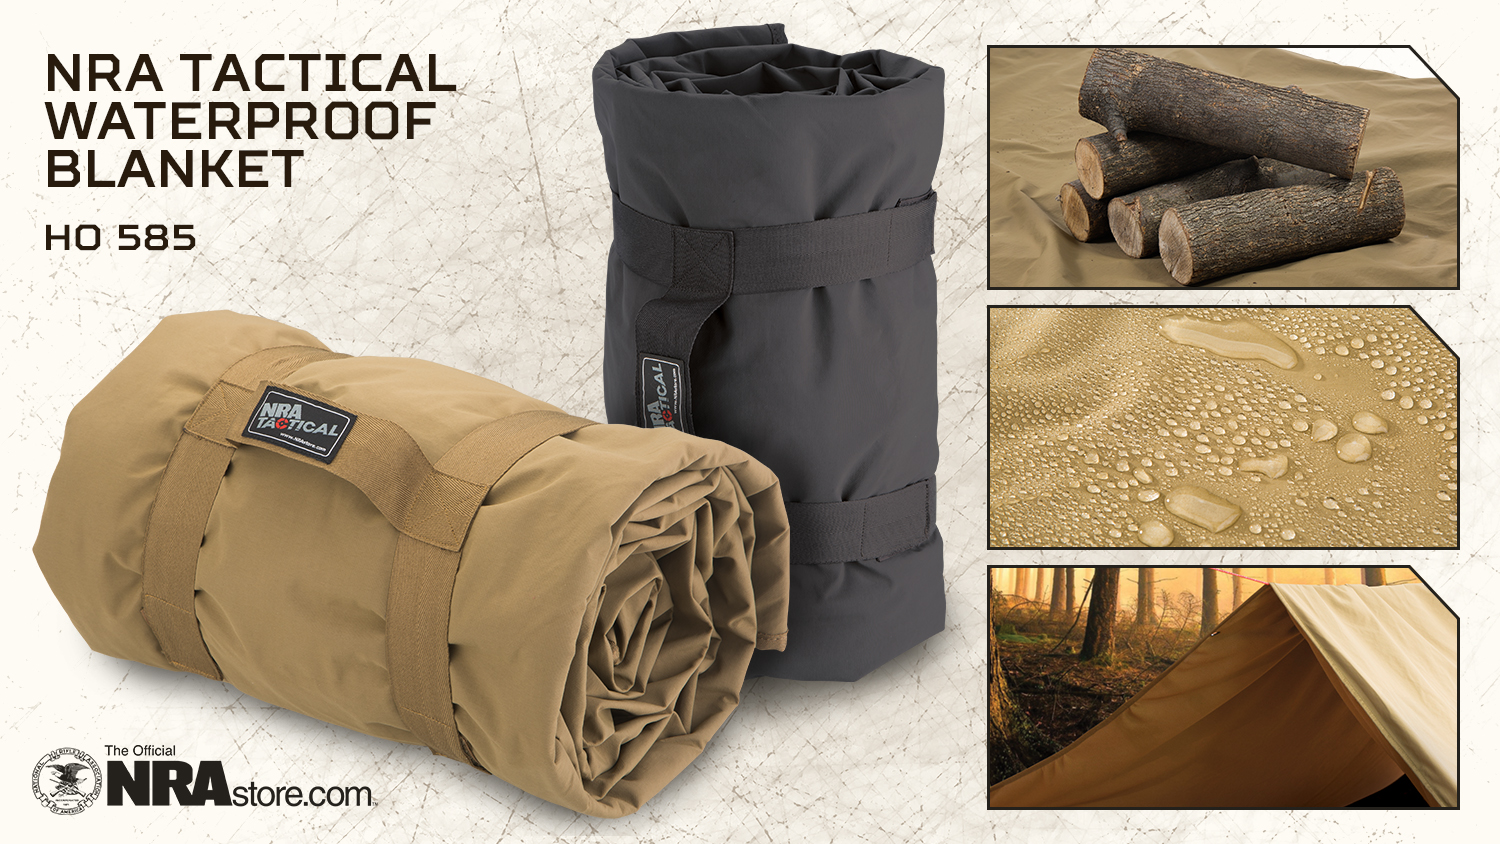 NRA Store Product Highlight: Tactical Waterproof Blanket